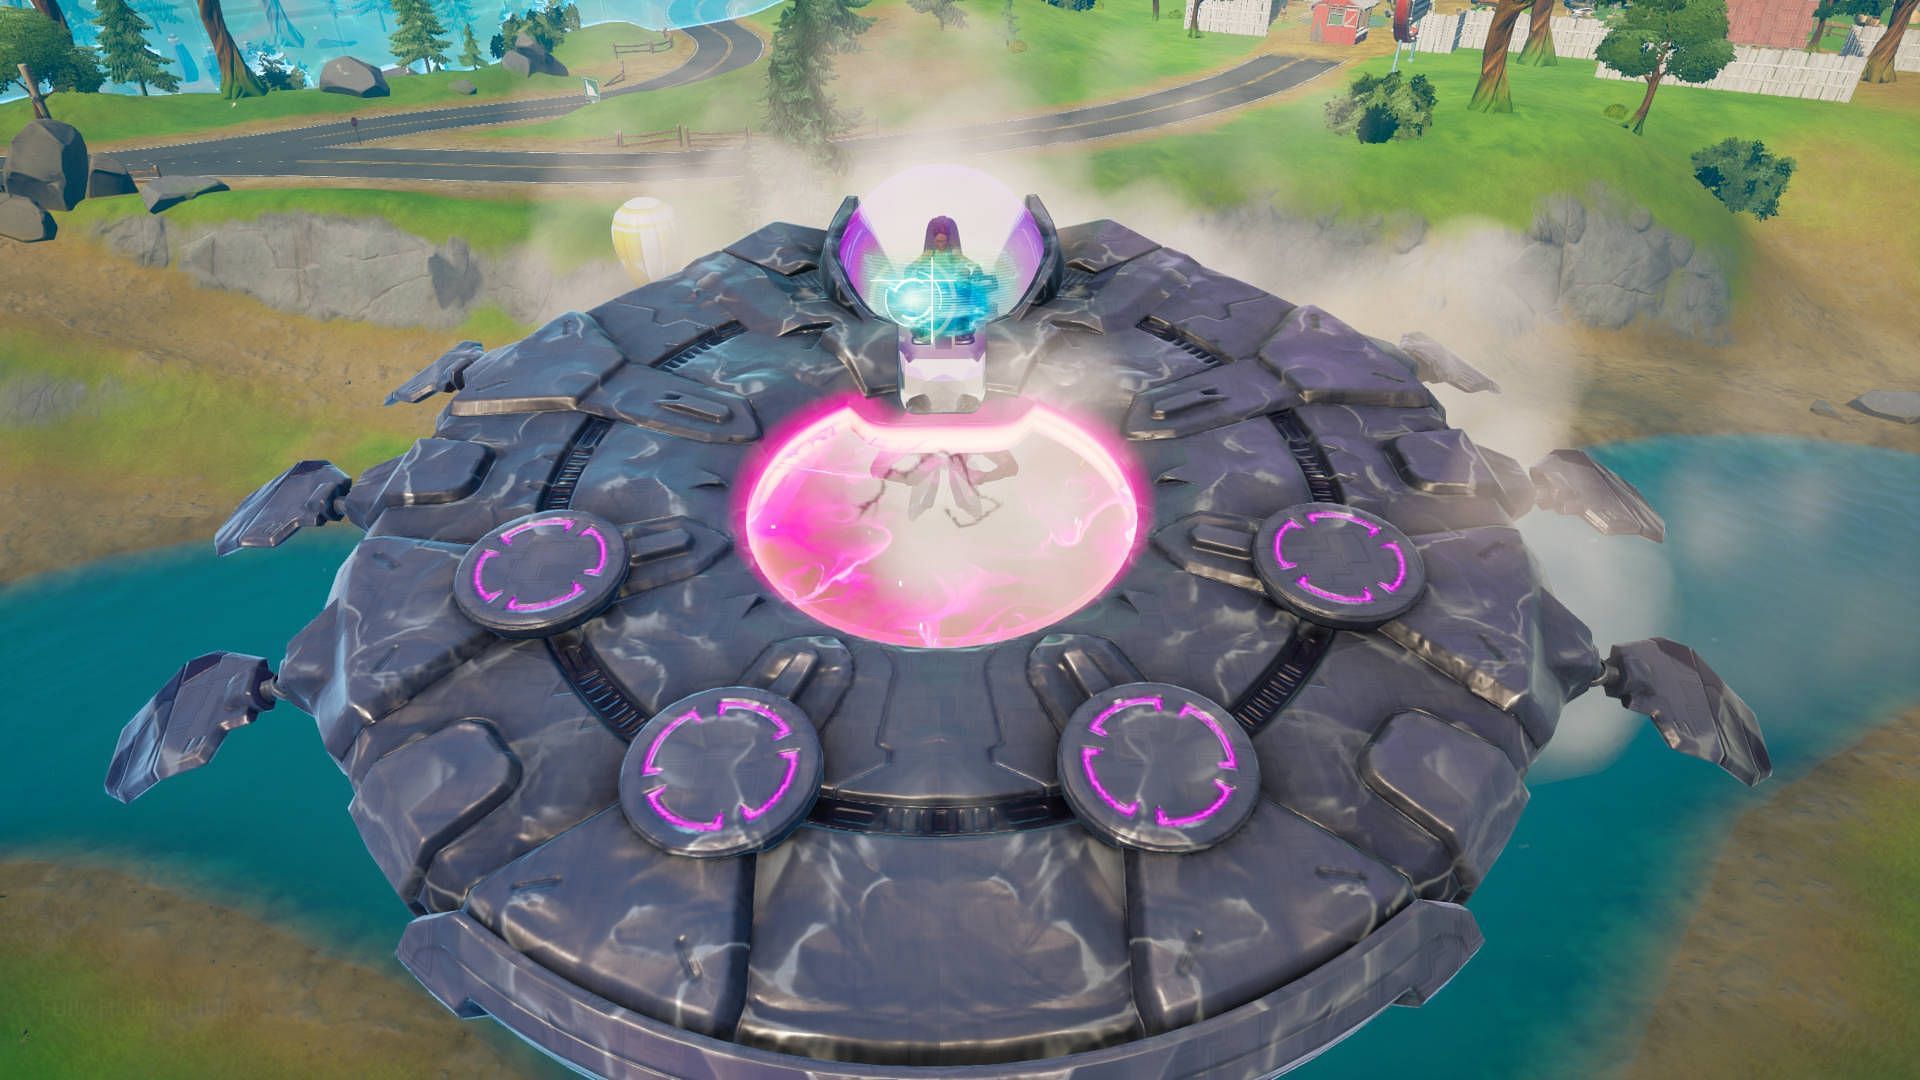 UFOs allow players to earn a lot of eliminations and win games without any effort (Image via Epic Games)